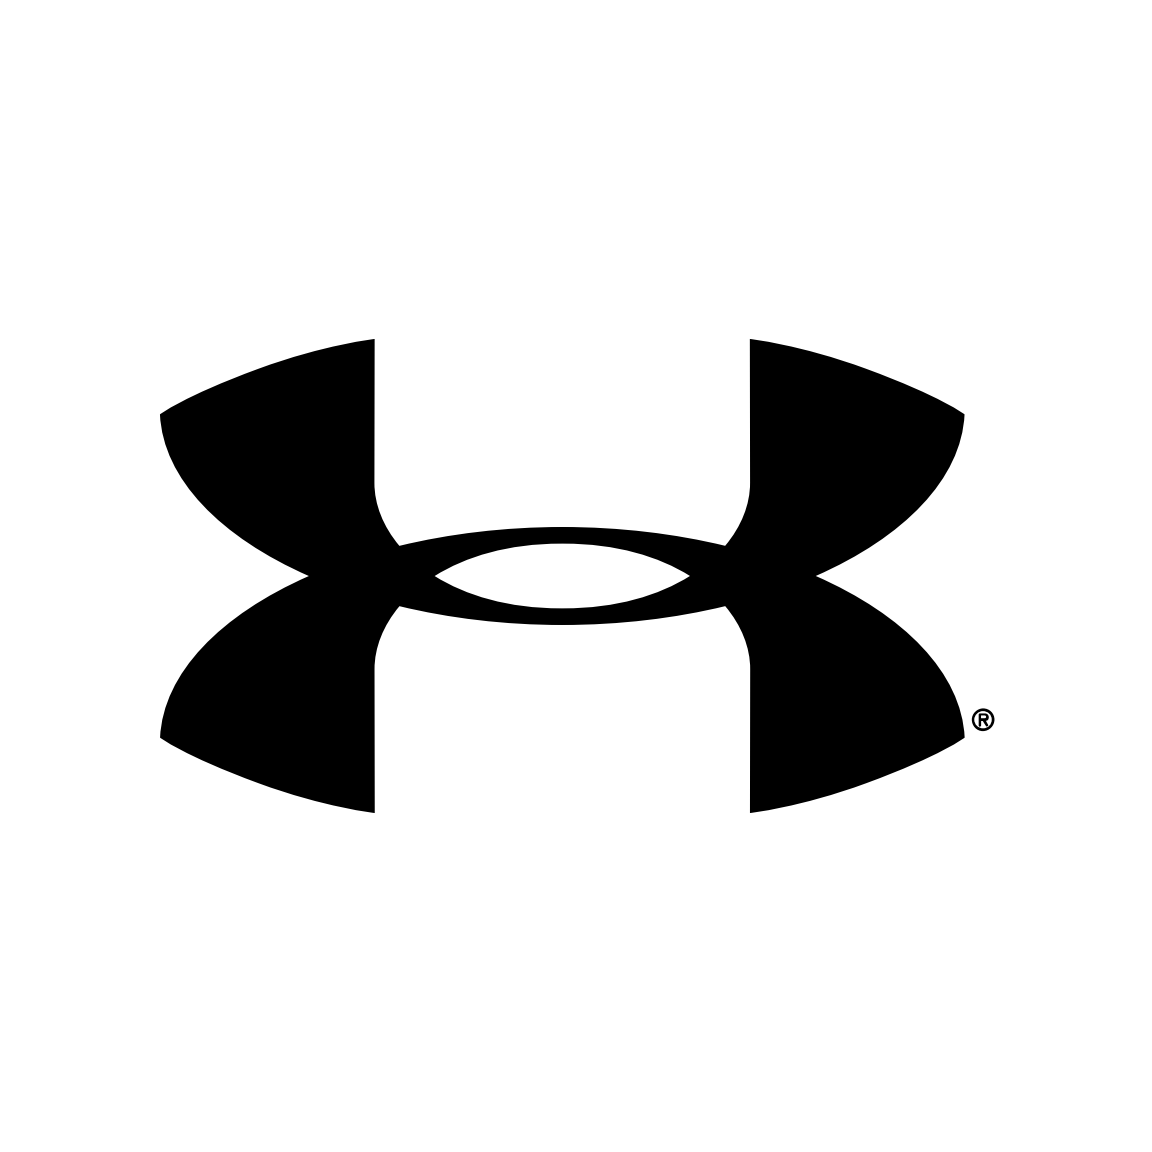 Under Armour.png